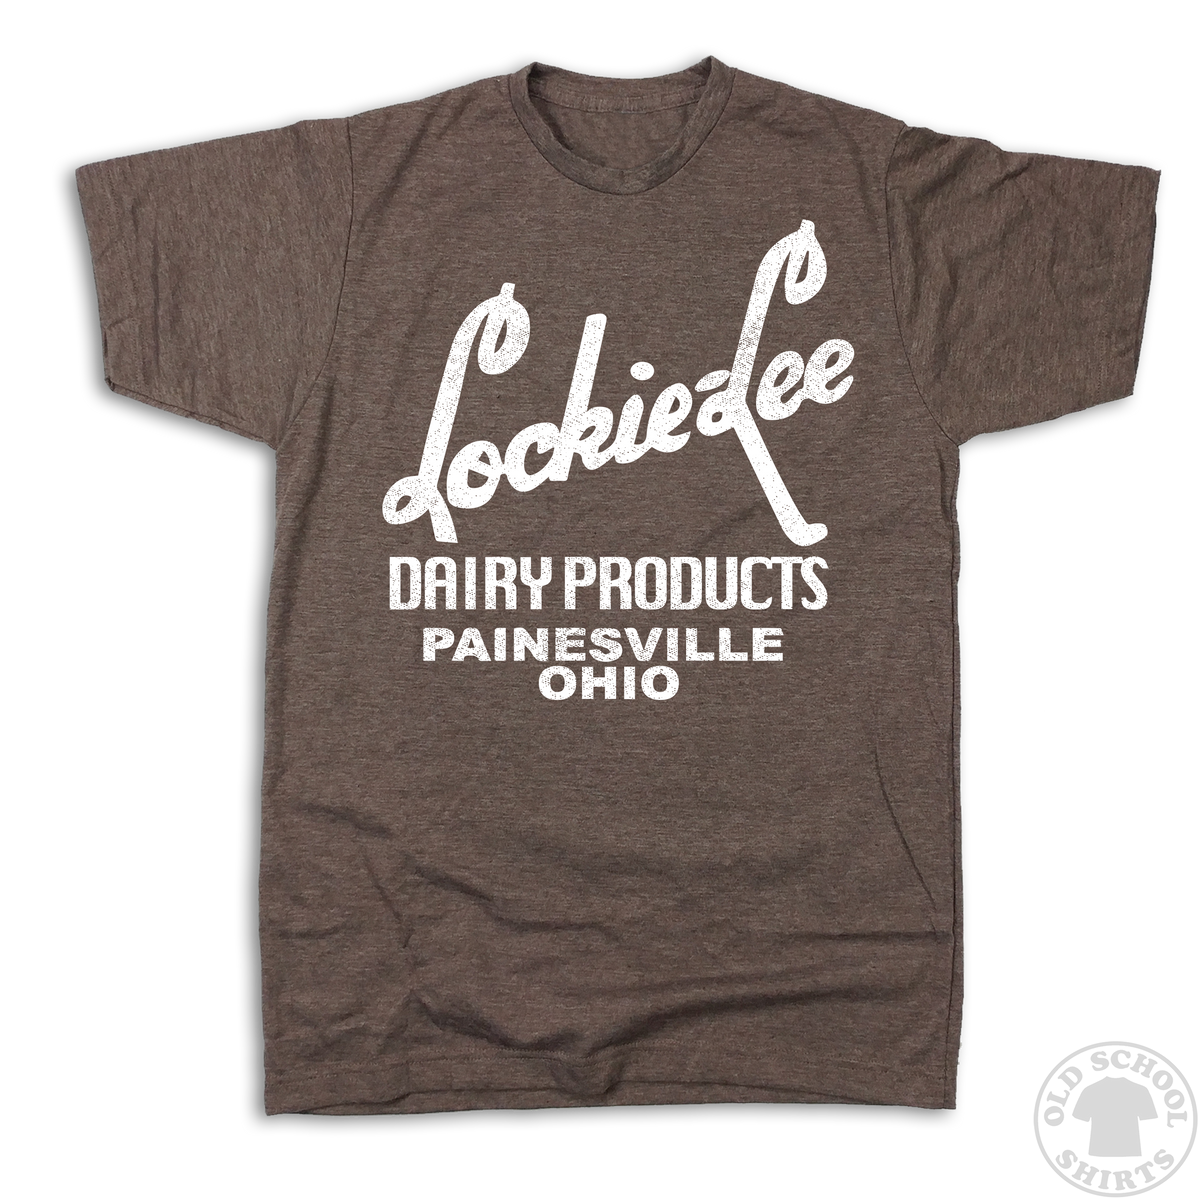 Lockie-Lee Dairy Products - Old School Shirts- Retro Sports T Shirts